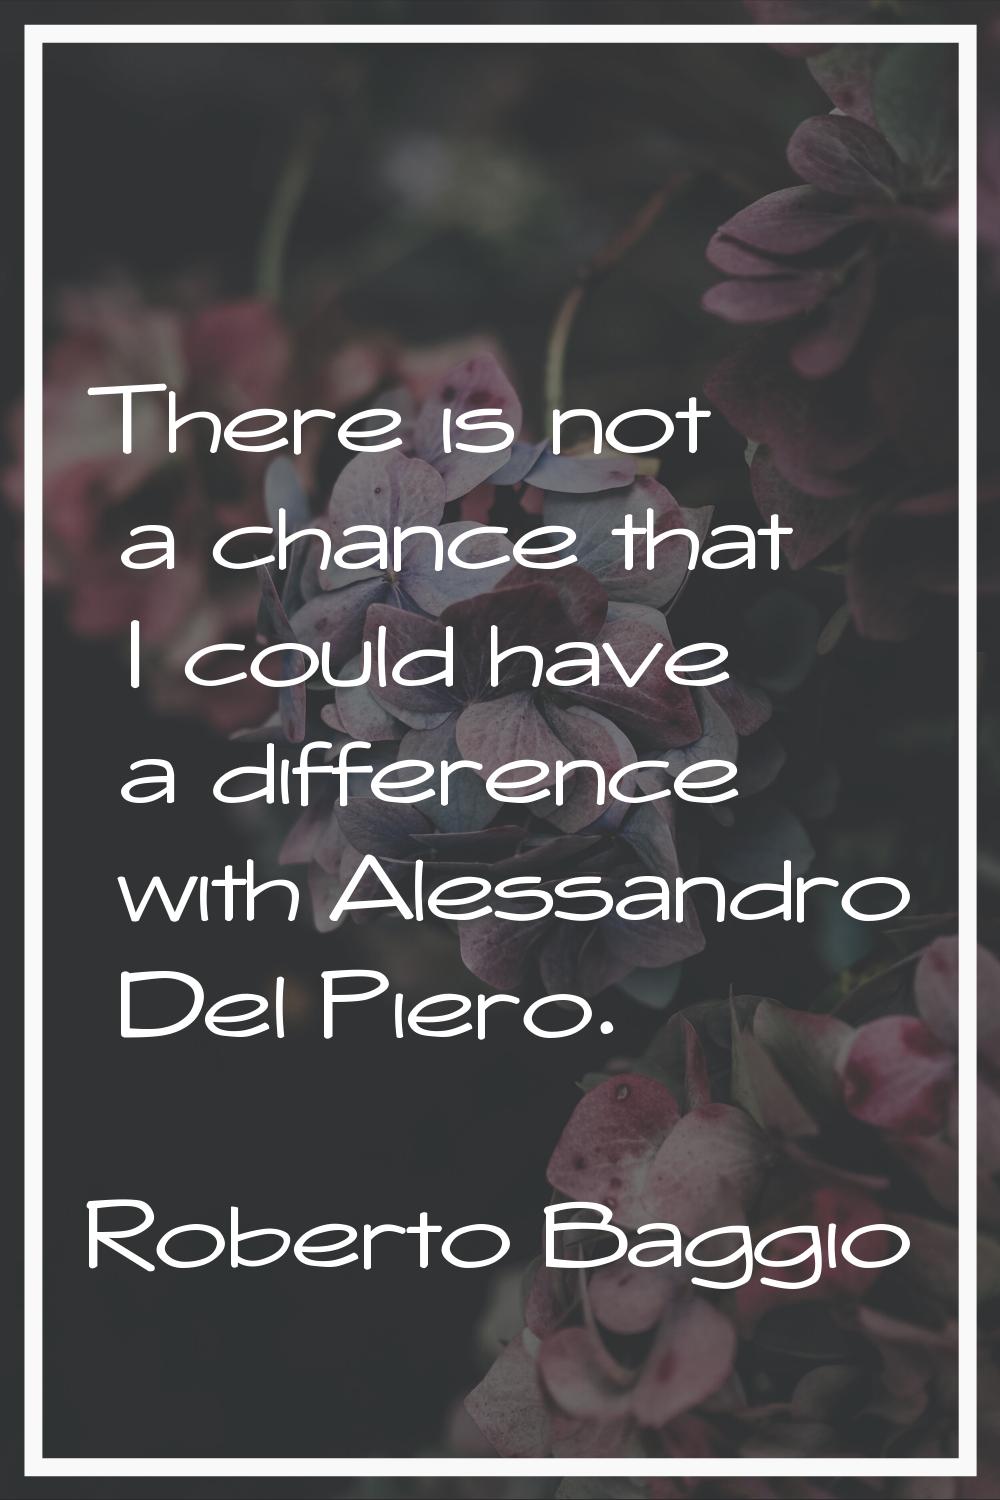 There is not a chance that I could have a difference with Alessandro Del Piero.